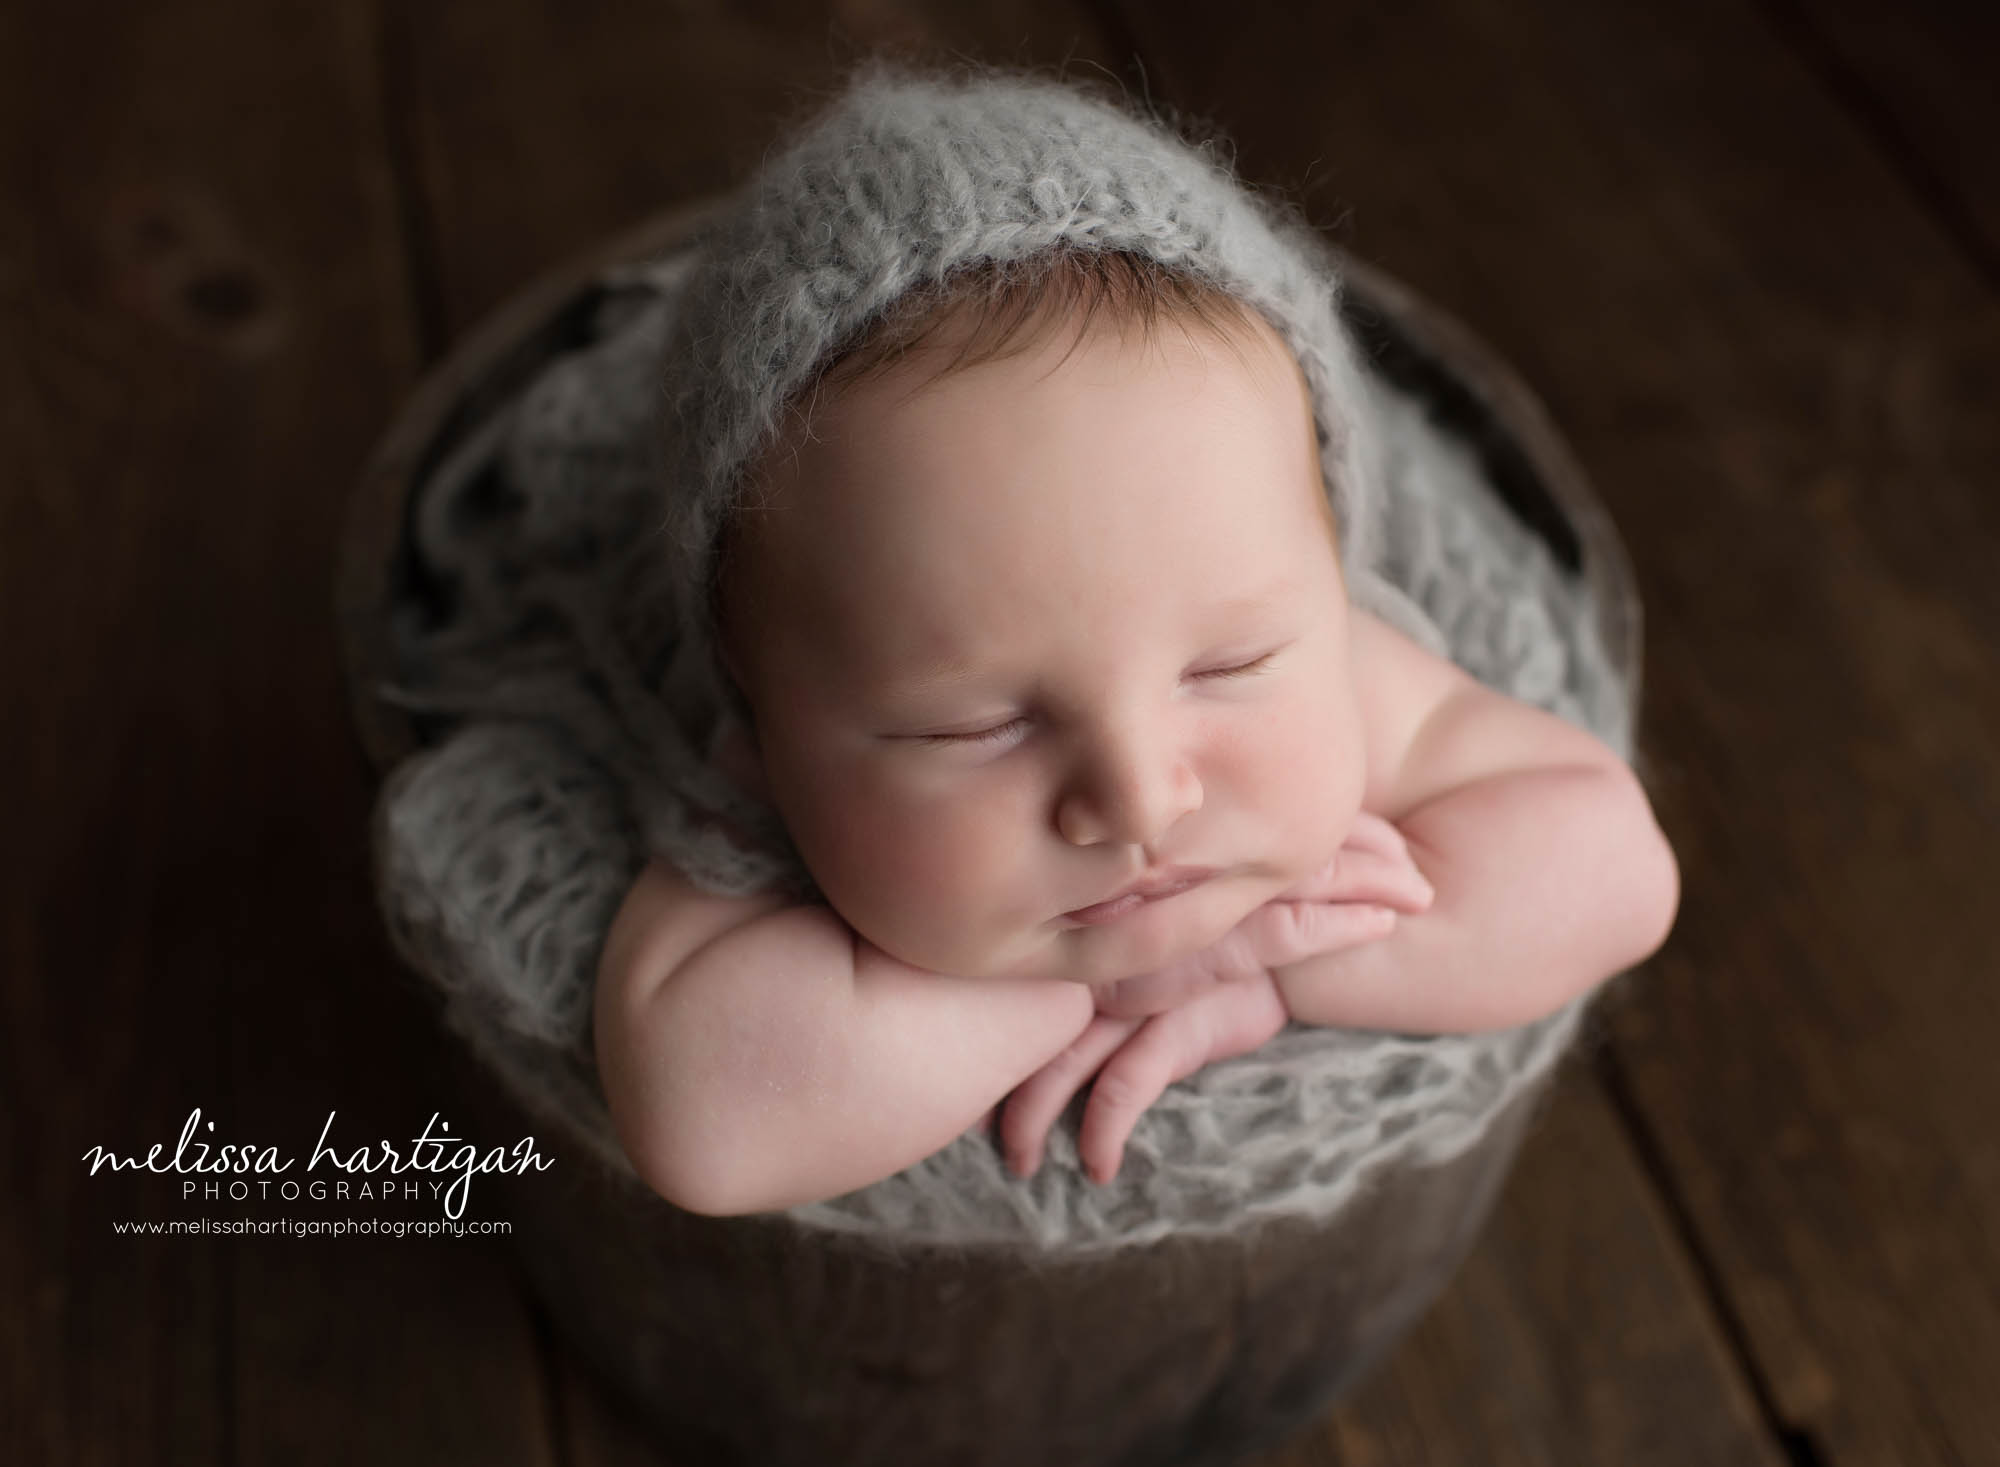 baby boy posed in wooden bucket with gray knitted bonnet